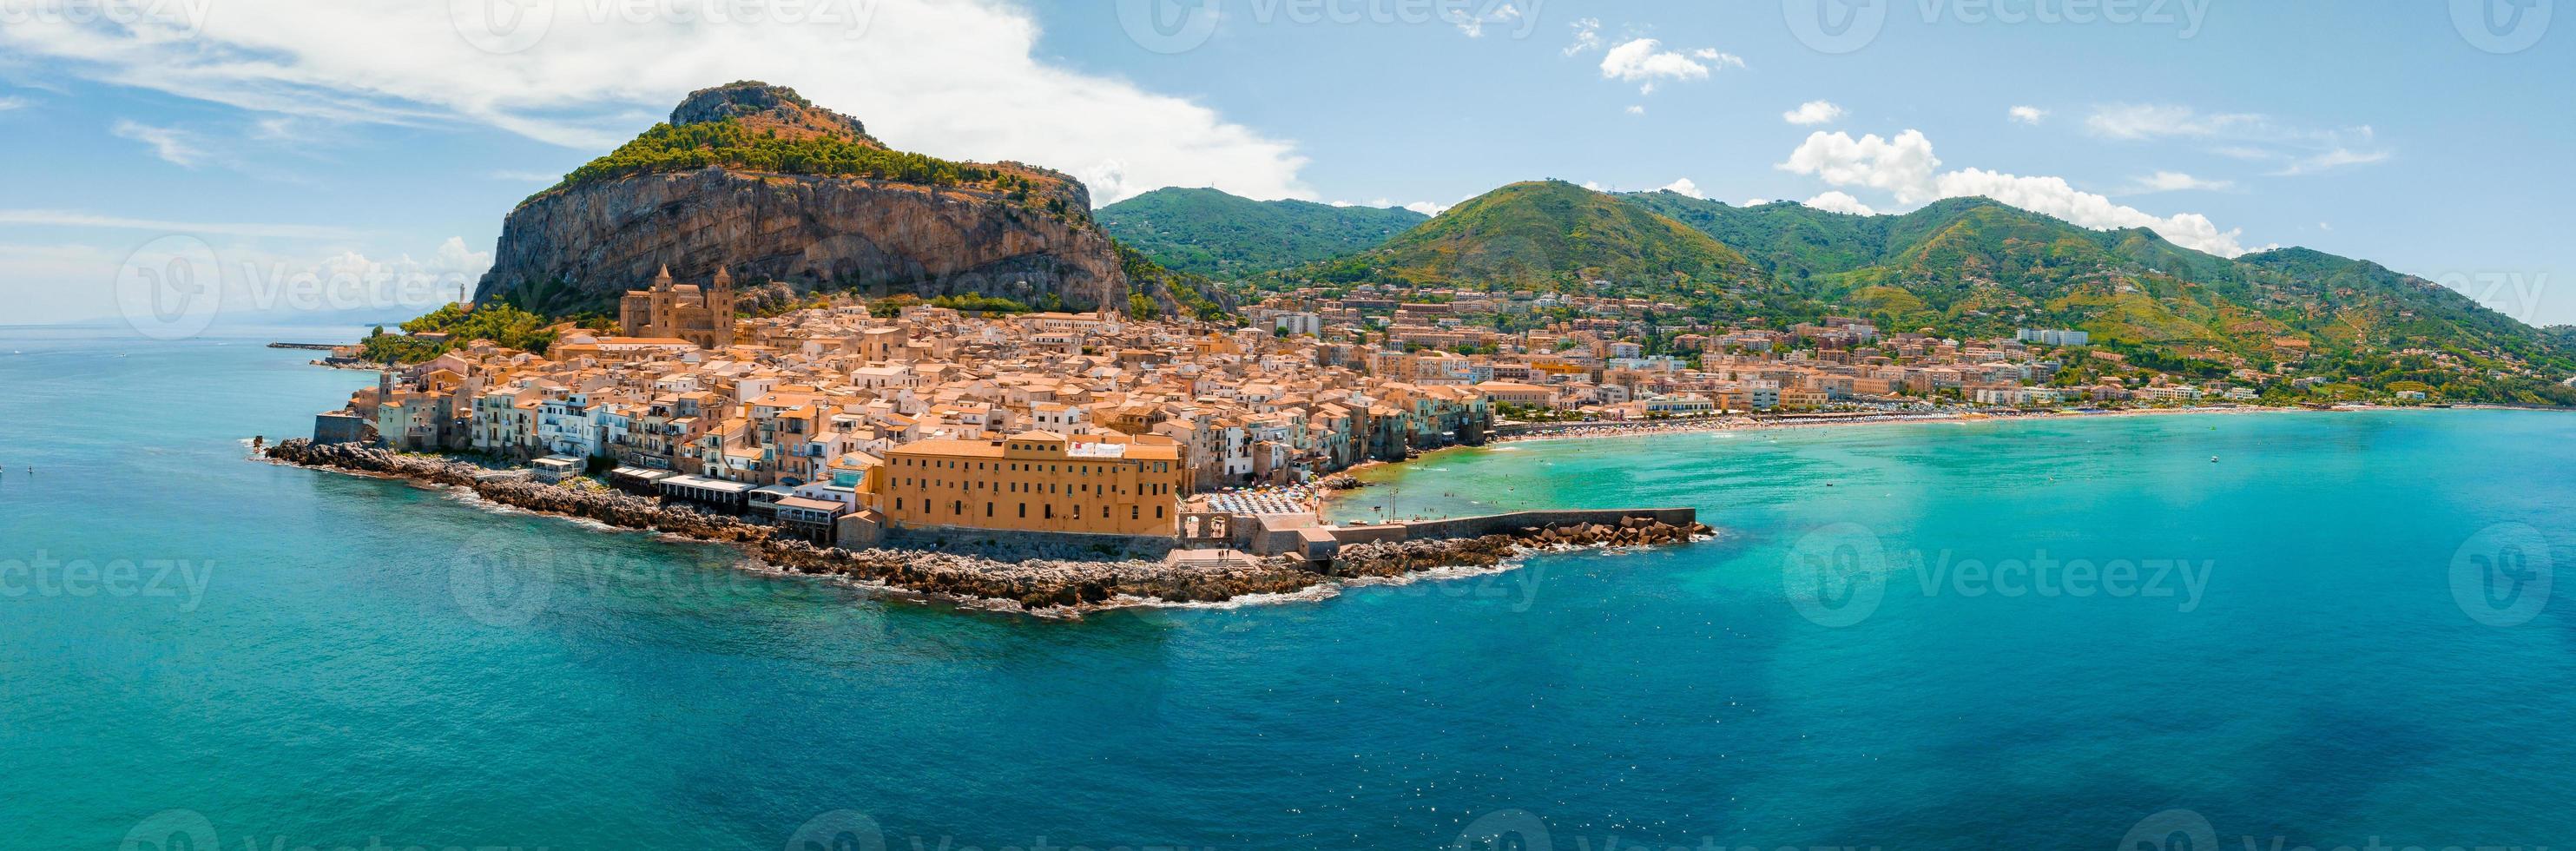 Aerial scenic view of the Cefalu, medieval village of Sicily island photo